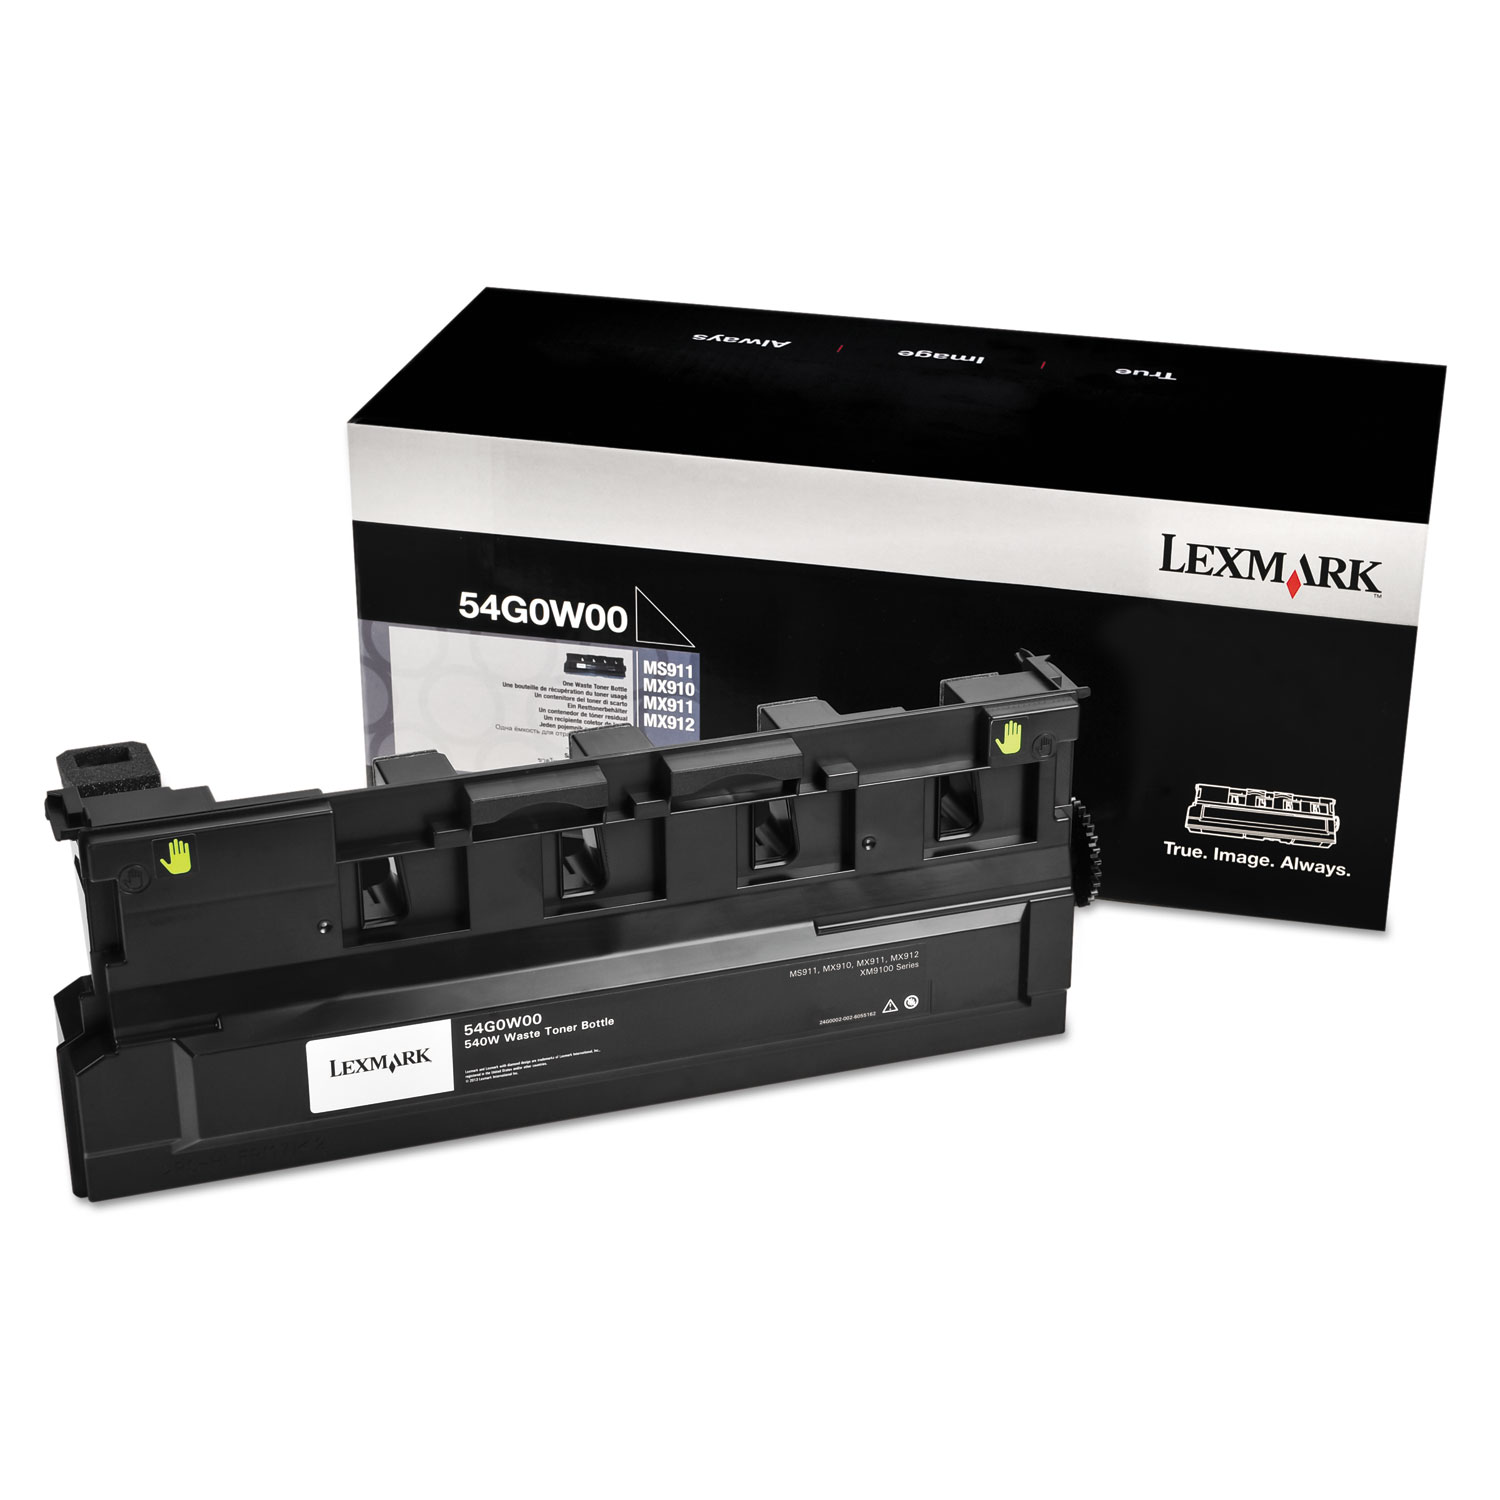  Lexmark 54G0W00 54G0W00 Waste Toner Container, 50000 Page-Yield (LEX54G0W00) 